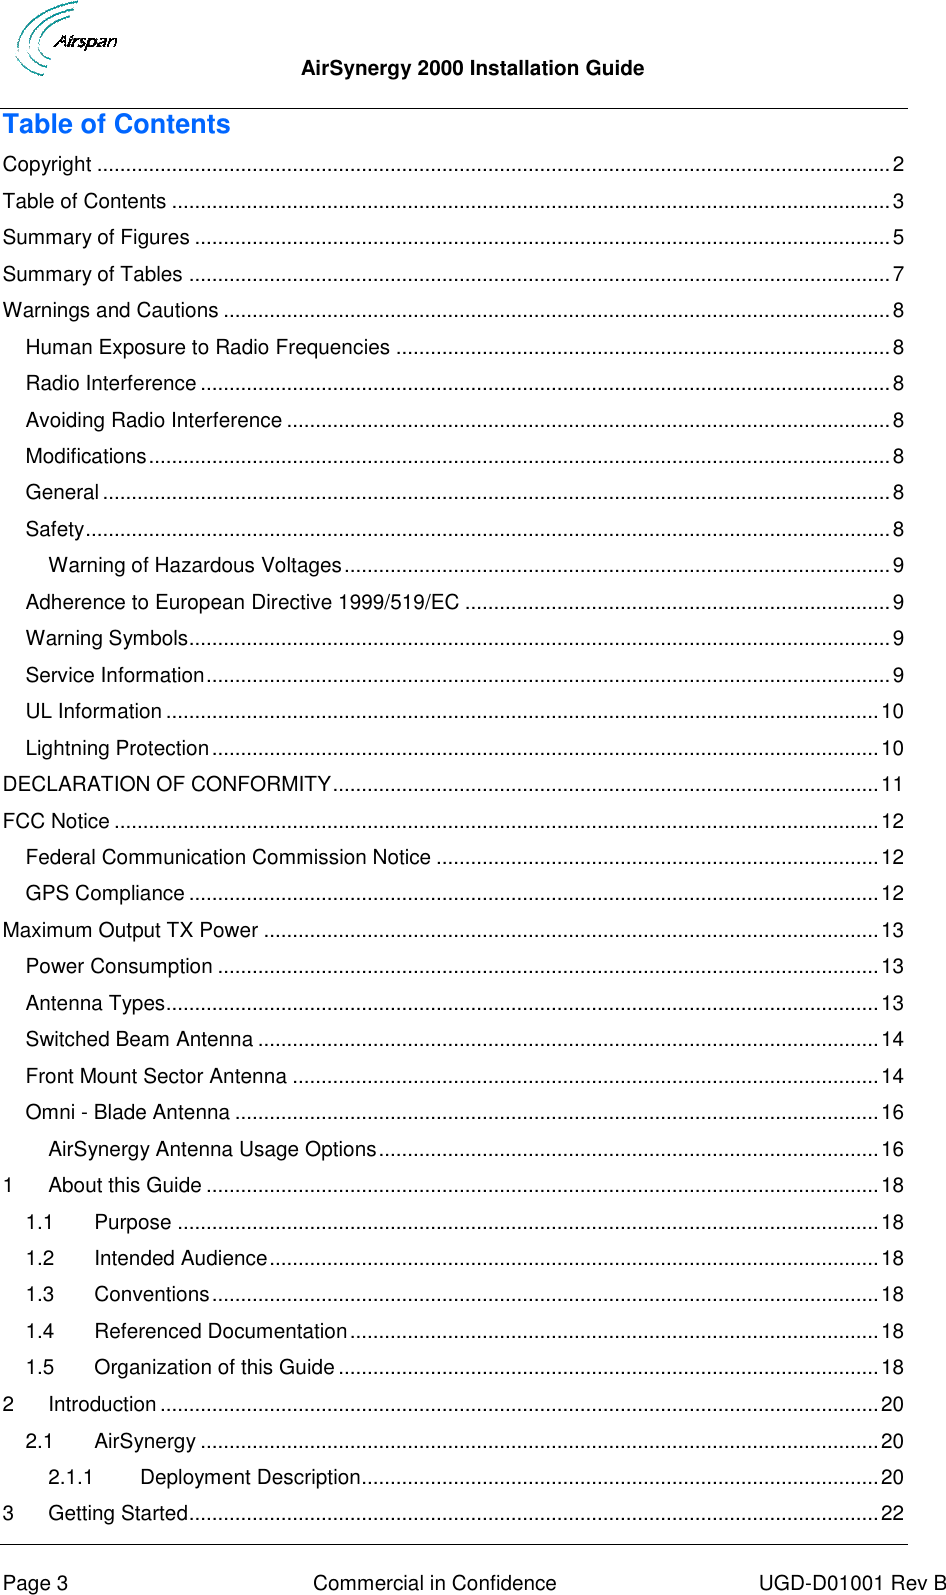  AirSynergy 2000 Installation Guide     Page 3  Commercial in Confidence  UGD-D01001 Rev B Table of Contents Copyright .......................................................................................................................................... 2 Table of Contents ............................................................................................................................. 3 Summary of Figures ......................................................................................................................... 5 Summary of Tables .......................................................................................................................... 7 Warnings and Cautions .................................................................................................................... 8 Human Exposure to Radio Frequencies ...................................................................................... 8 Radio Interference ........................................................................................................................ 8 Avoiding Radio Interference ......................................................................................................... 8 Modifications ................................................................................................................................. 8 General ......................................................................................................................................... 8 Safety ............................................................................................................................................ 8 Warning of Hazardous Voltages ............................................................................................... 9 Adherence to European Directive 1999/519/EC .......................................................................... 9 Warning Symbols.......................................................................................................................... 9 Service Information ....................................................................................................................... 9 UL Information ............................................................................................................................ 10 Lightning Protection .................................................................................................................... 10 DECLARATION OF CONFORMITY ............................................................................................... 11 FCC Notice ..................................................................................................................................... 12 Federal Communication Commission Notice ............................................................................. 12 GPS Compliance ........................................................................................................................ 12 Maximum Output TX Power ........................................................................................................... 13 Power Consumption ................................................................................................................... 13 Antenna Types............................................................................................................................ 13 Switched Beam Antenna ............................................................................................................ 14 Front Mount Sector Antenna ...................................................................................................... 14 Omni - Blade Antenna ................................................................................................................ 16 AirSynergy Antenna Usage Options ....................................................................................... 16 1 About this Guide ..................................................................................................................... 18 1.1 Purpose .......................................................................................................................... 18 1.2 Intended Audience .......................................................................................................... 18 1.3 Conventions .................................................................................................................... 18 1.4 Referenced Documentation ............................................................................................ 18 1.5 Organization of this Guide .............................................................................................. 18 2 Introduction ............................................................................................................................. 20 2.1 AirSynergy ...................................................................................................................... 20 2.1.1 Deployment Description.......................................................................................... 20 3 Getting Started ........................................................................................................................ 22 